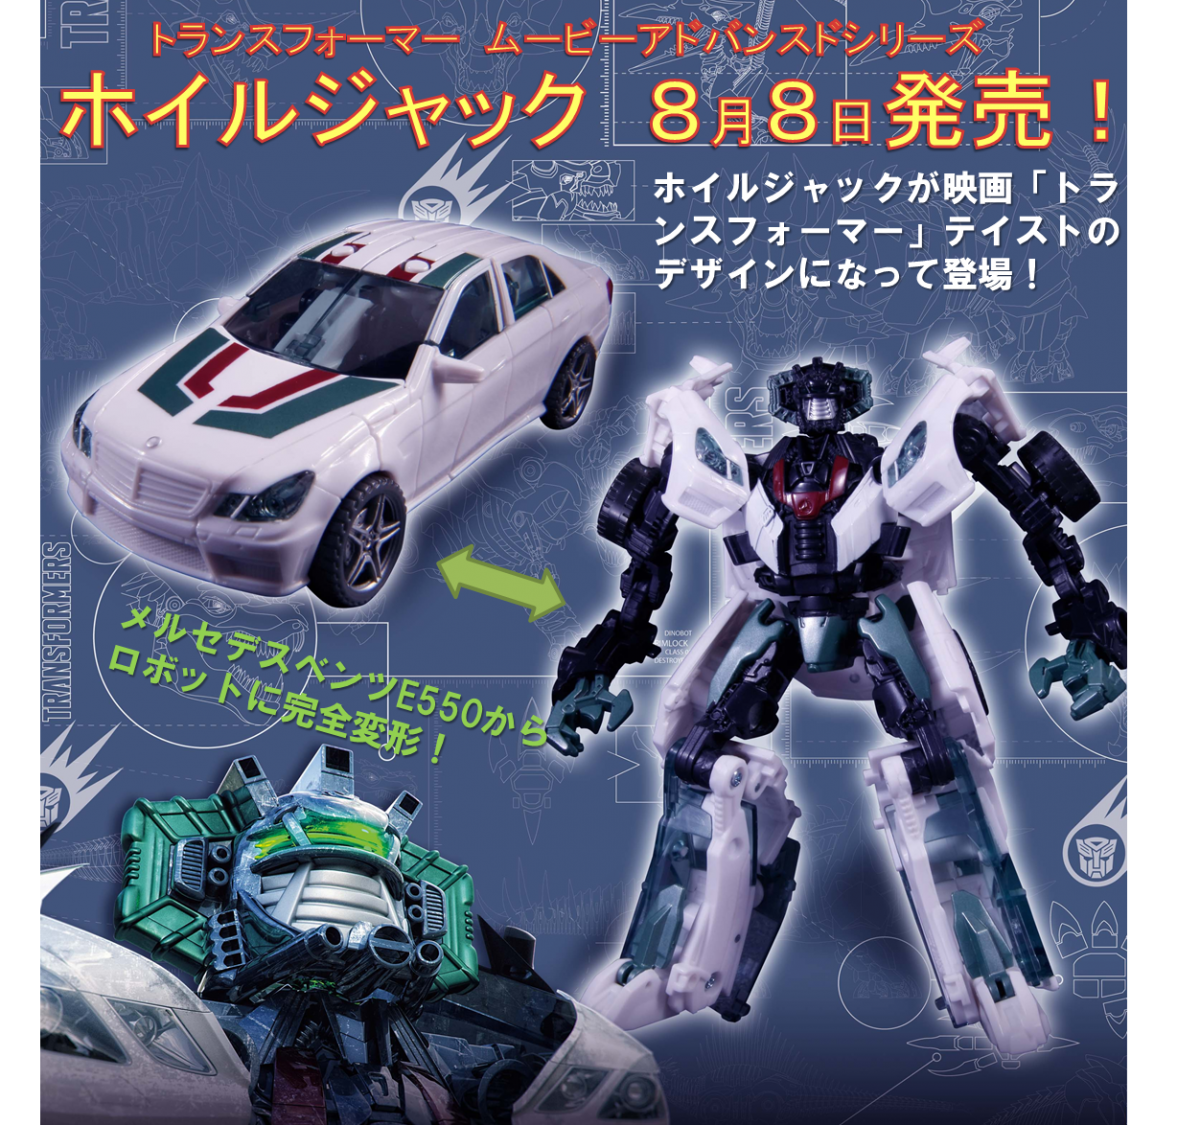 Transformers News: Black Knight Dinobots And Movie Advance EX Wheeljack Webpages With Updated Takara Tomy Info